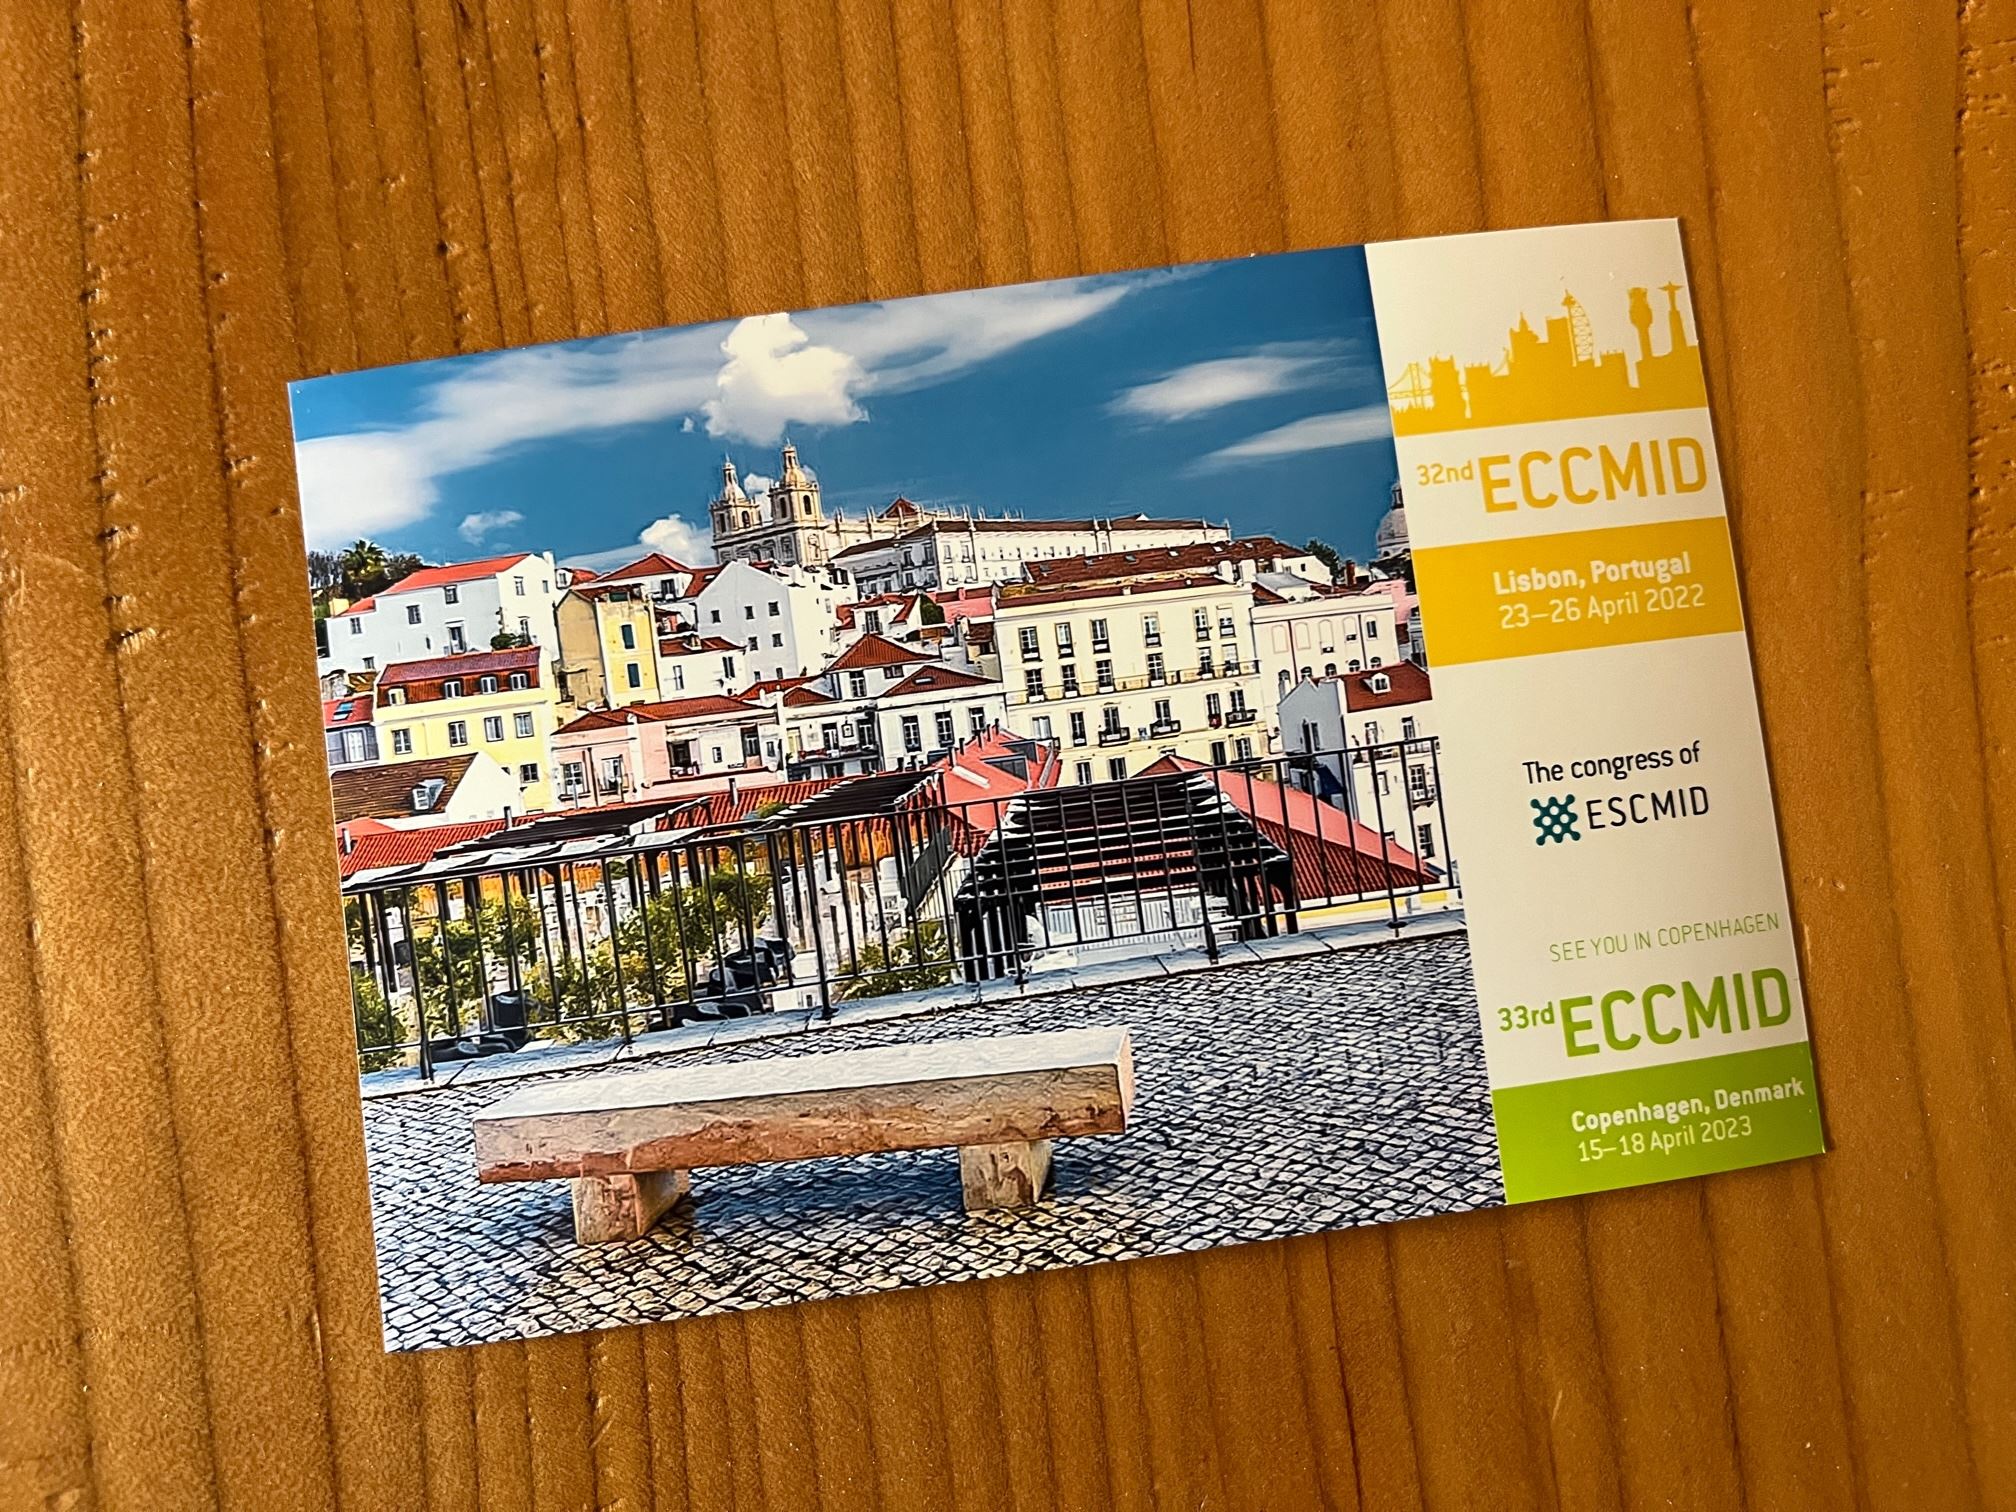 Global-PPS at ECCMID 2022